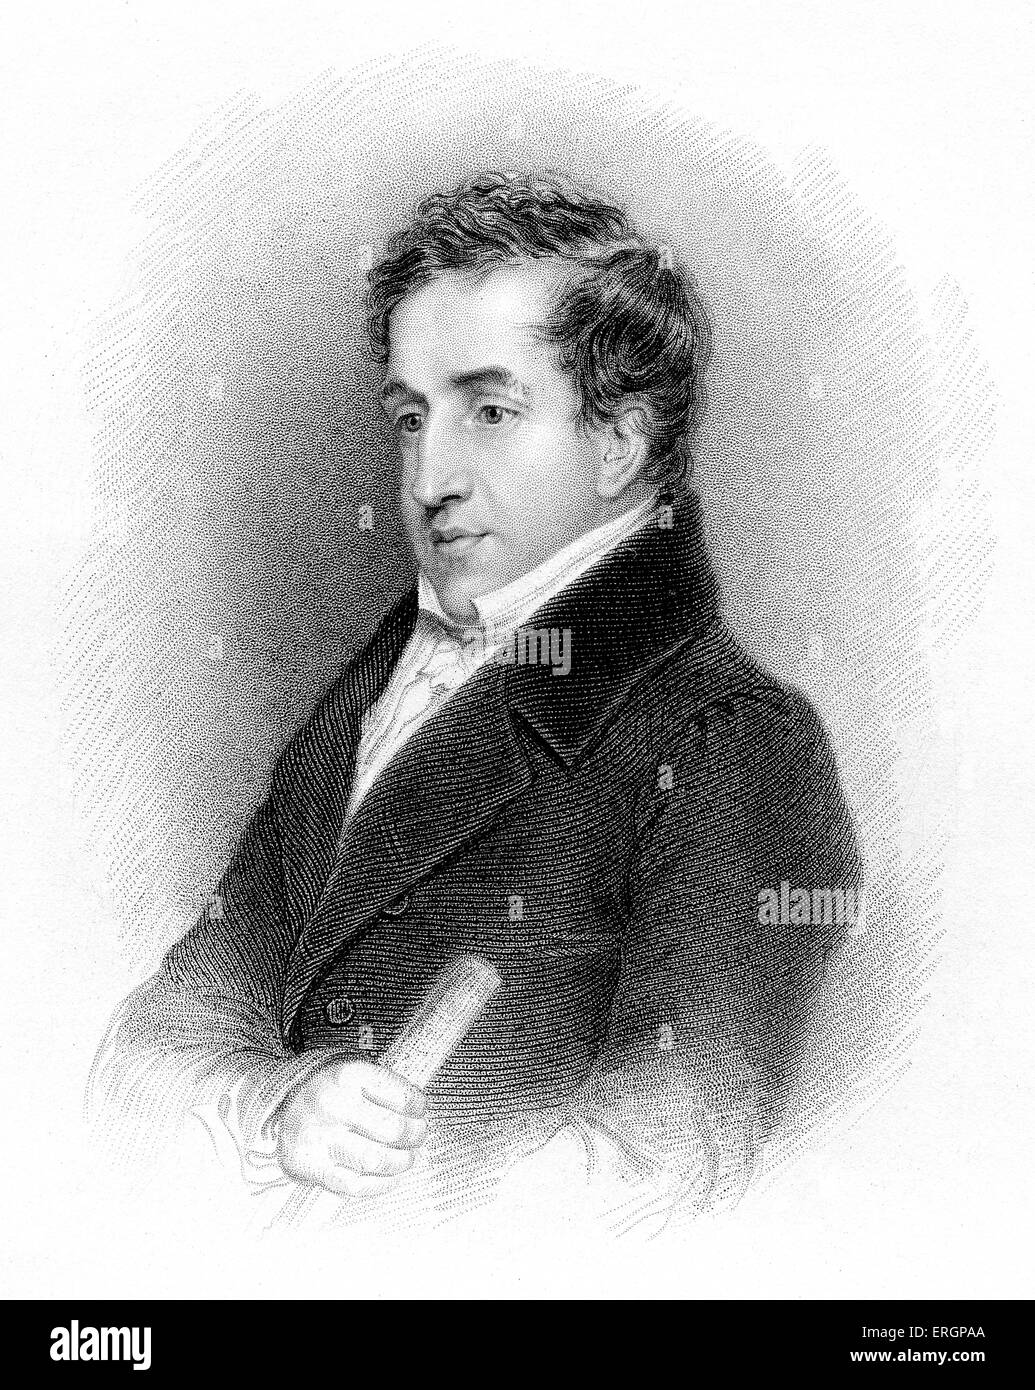 John Cam Hobhouse. British politician and memoirist. 27 June 1786 – 3 June 1869. Engraving by J. Hopwood after drawing by A. Stock Photo